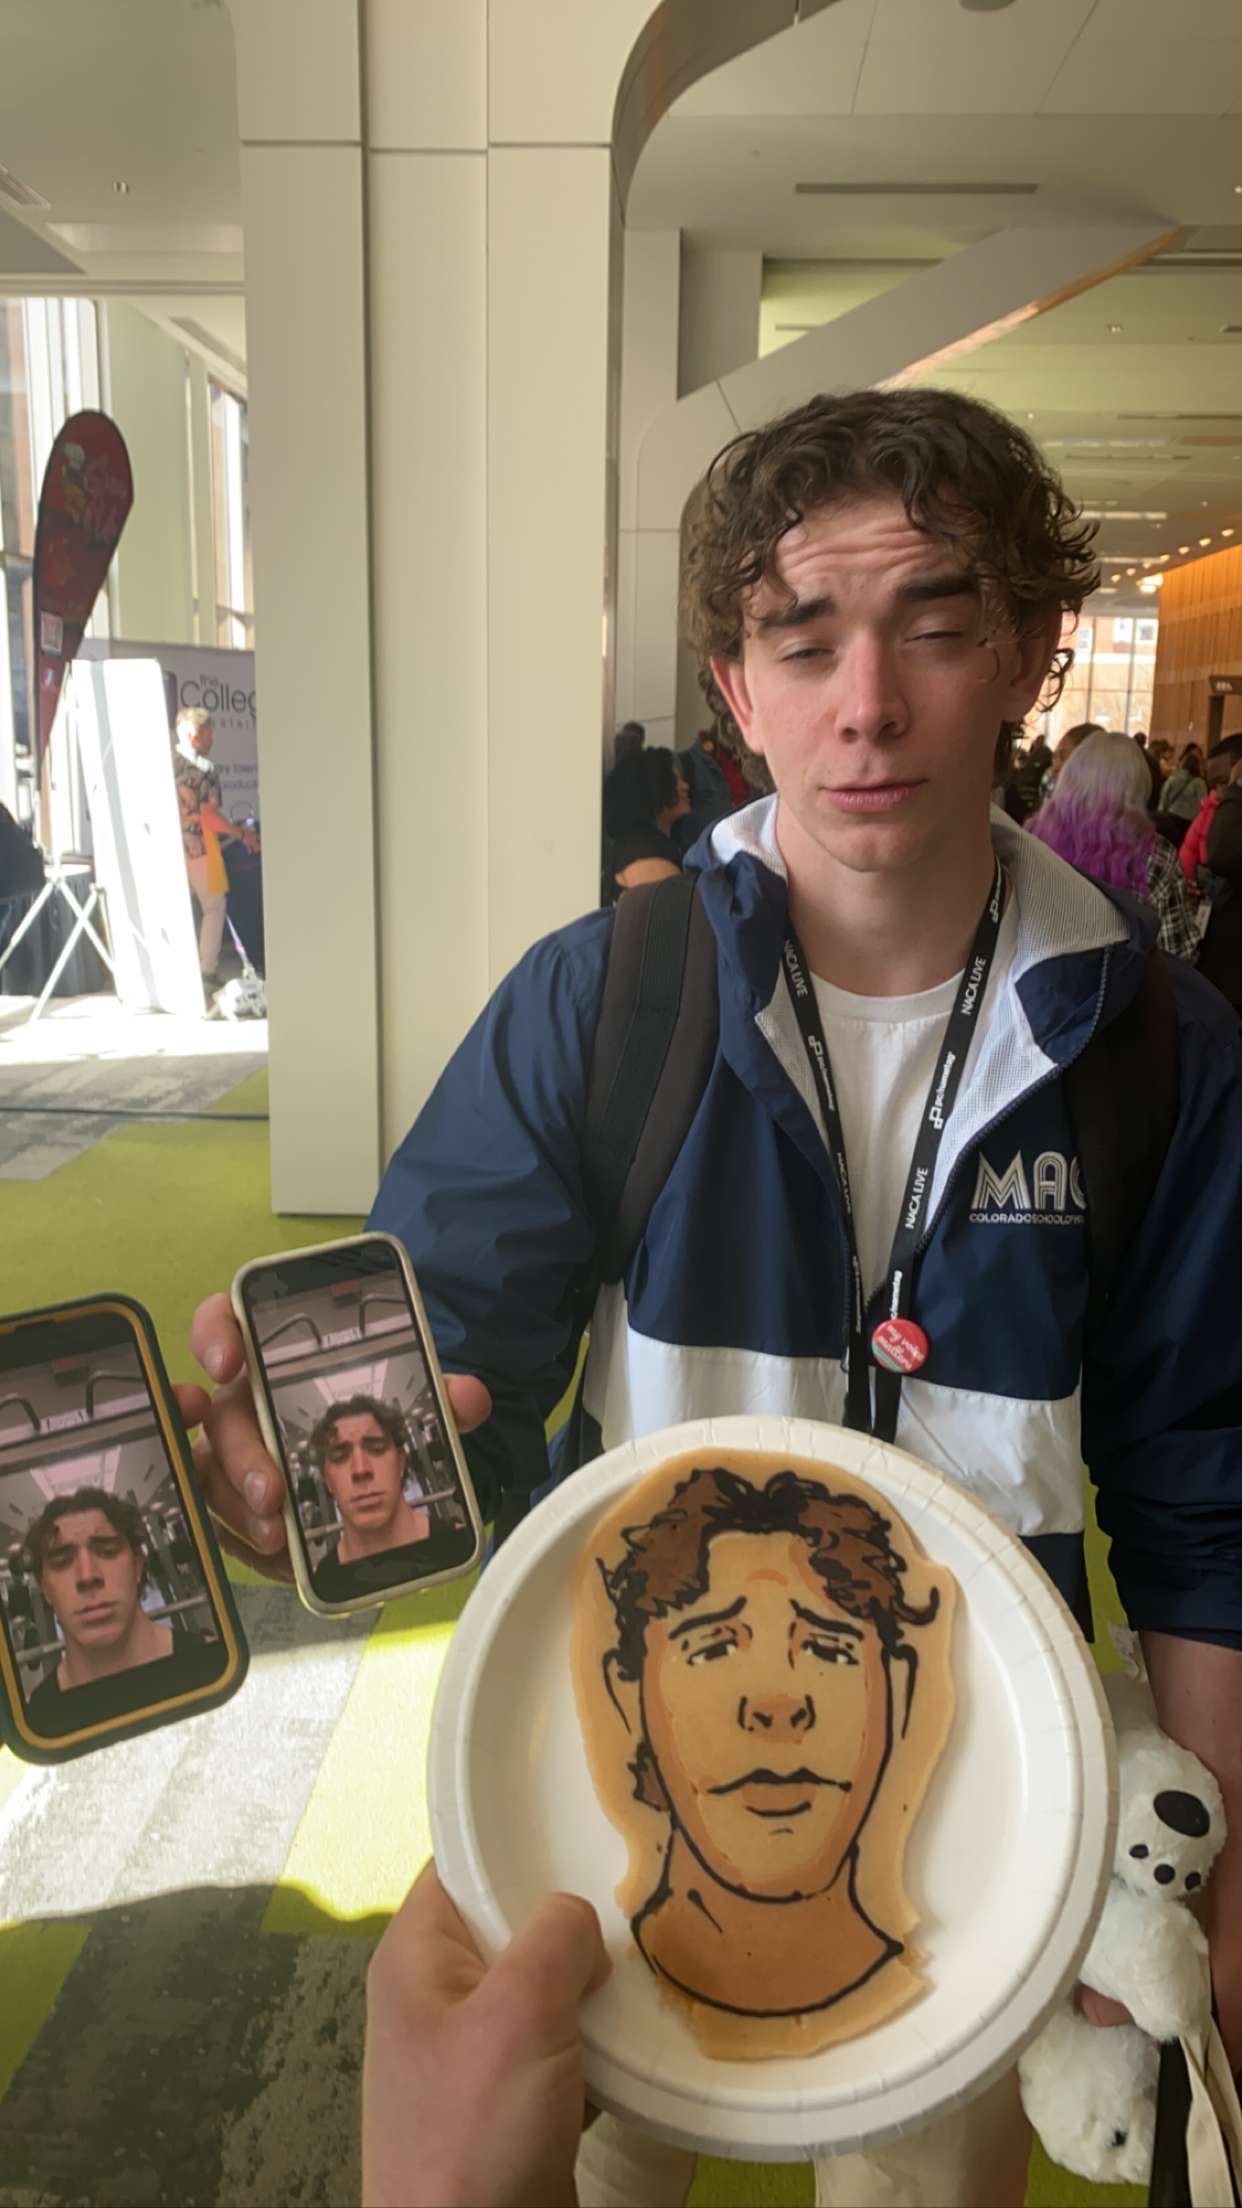 Student with pancake of his face